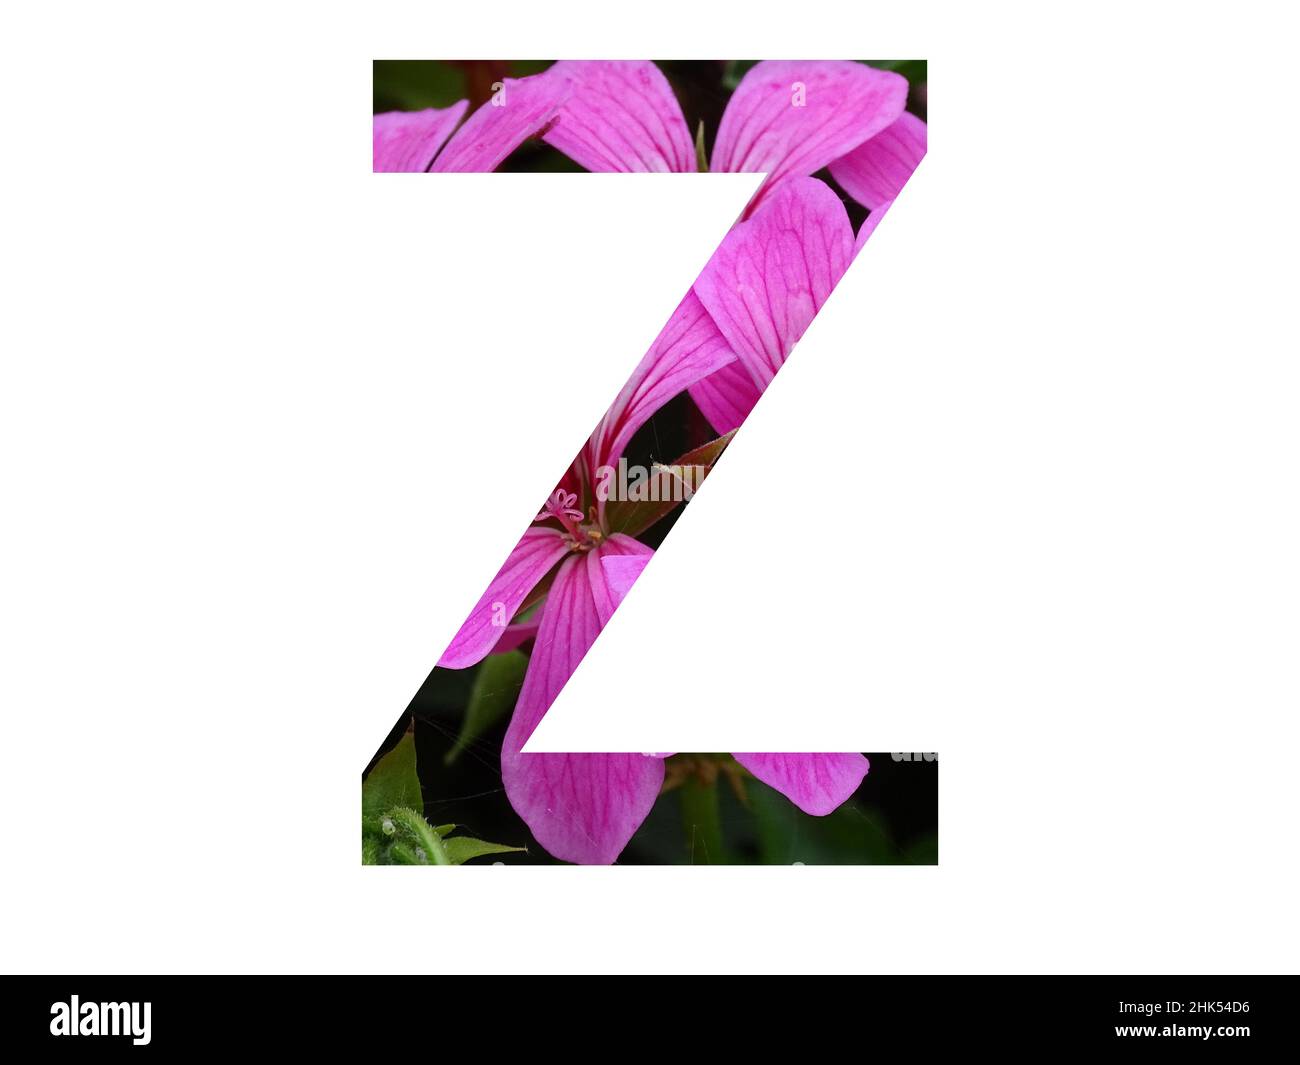 Letter z of the alphabet made with a pink flower of pelargonium, isolated on a white background Stock Photo